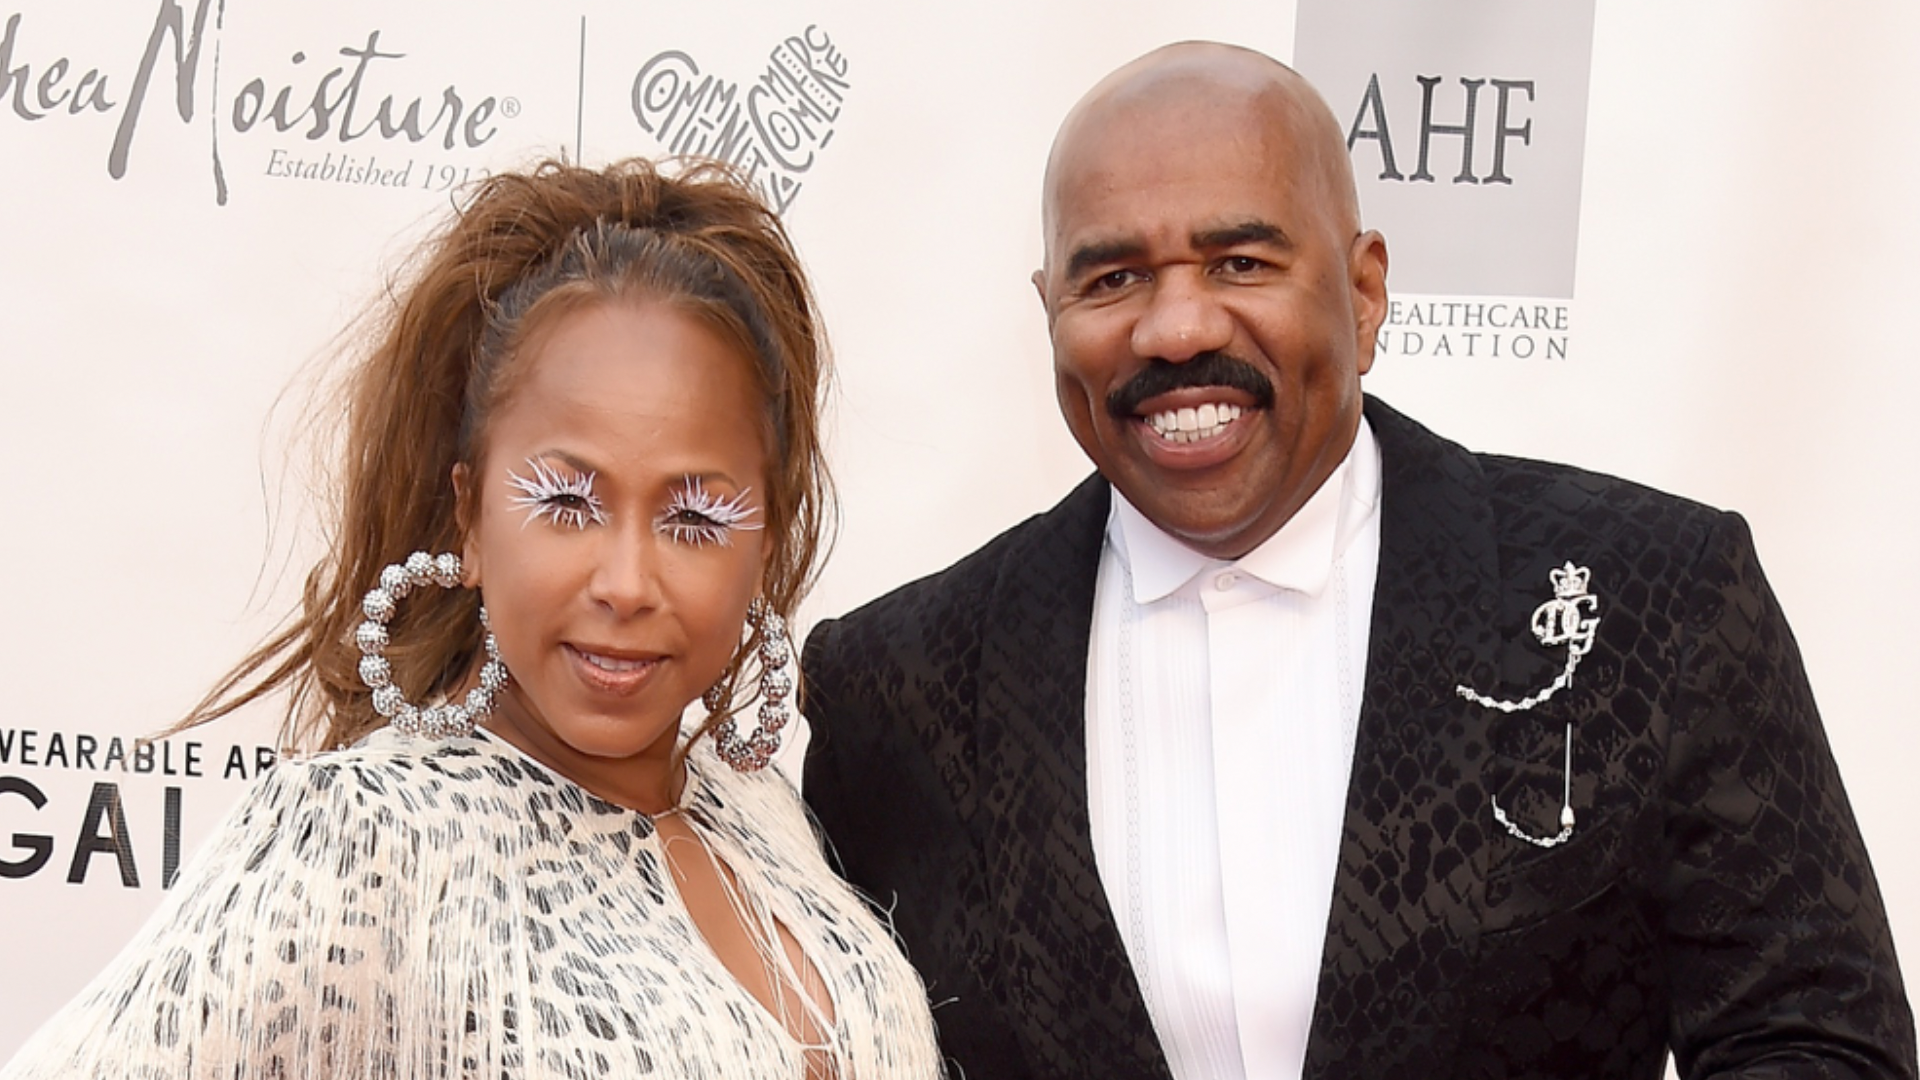 Steve Harvey Addresses Misconceptions About Wife After Cheating Rumors Complex image